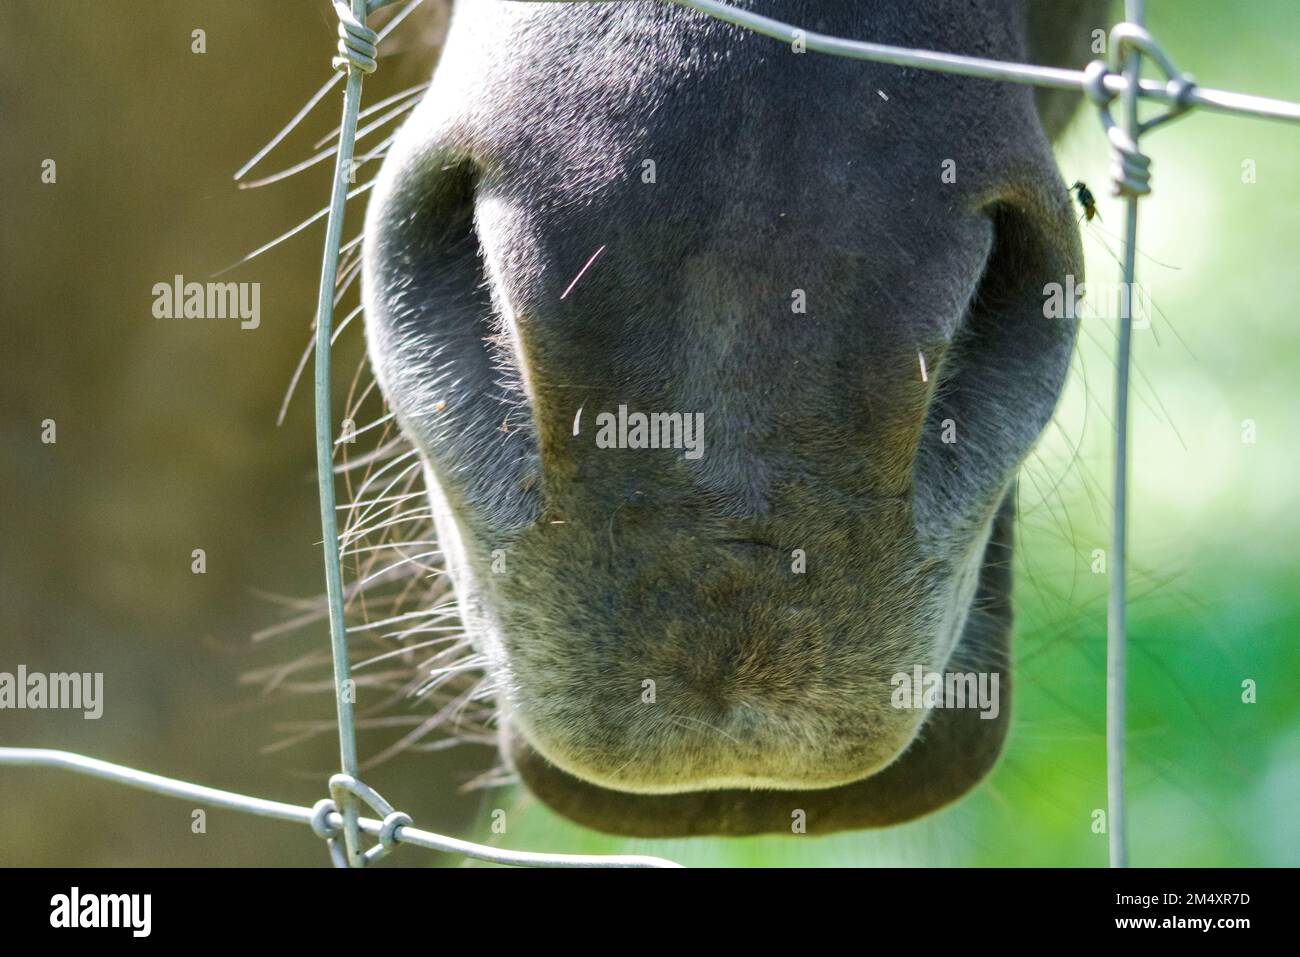 Close up of a horse's muzzle. Stock Photo